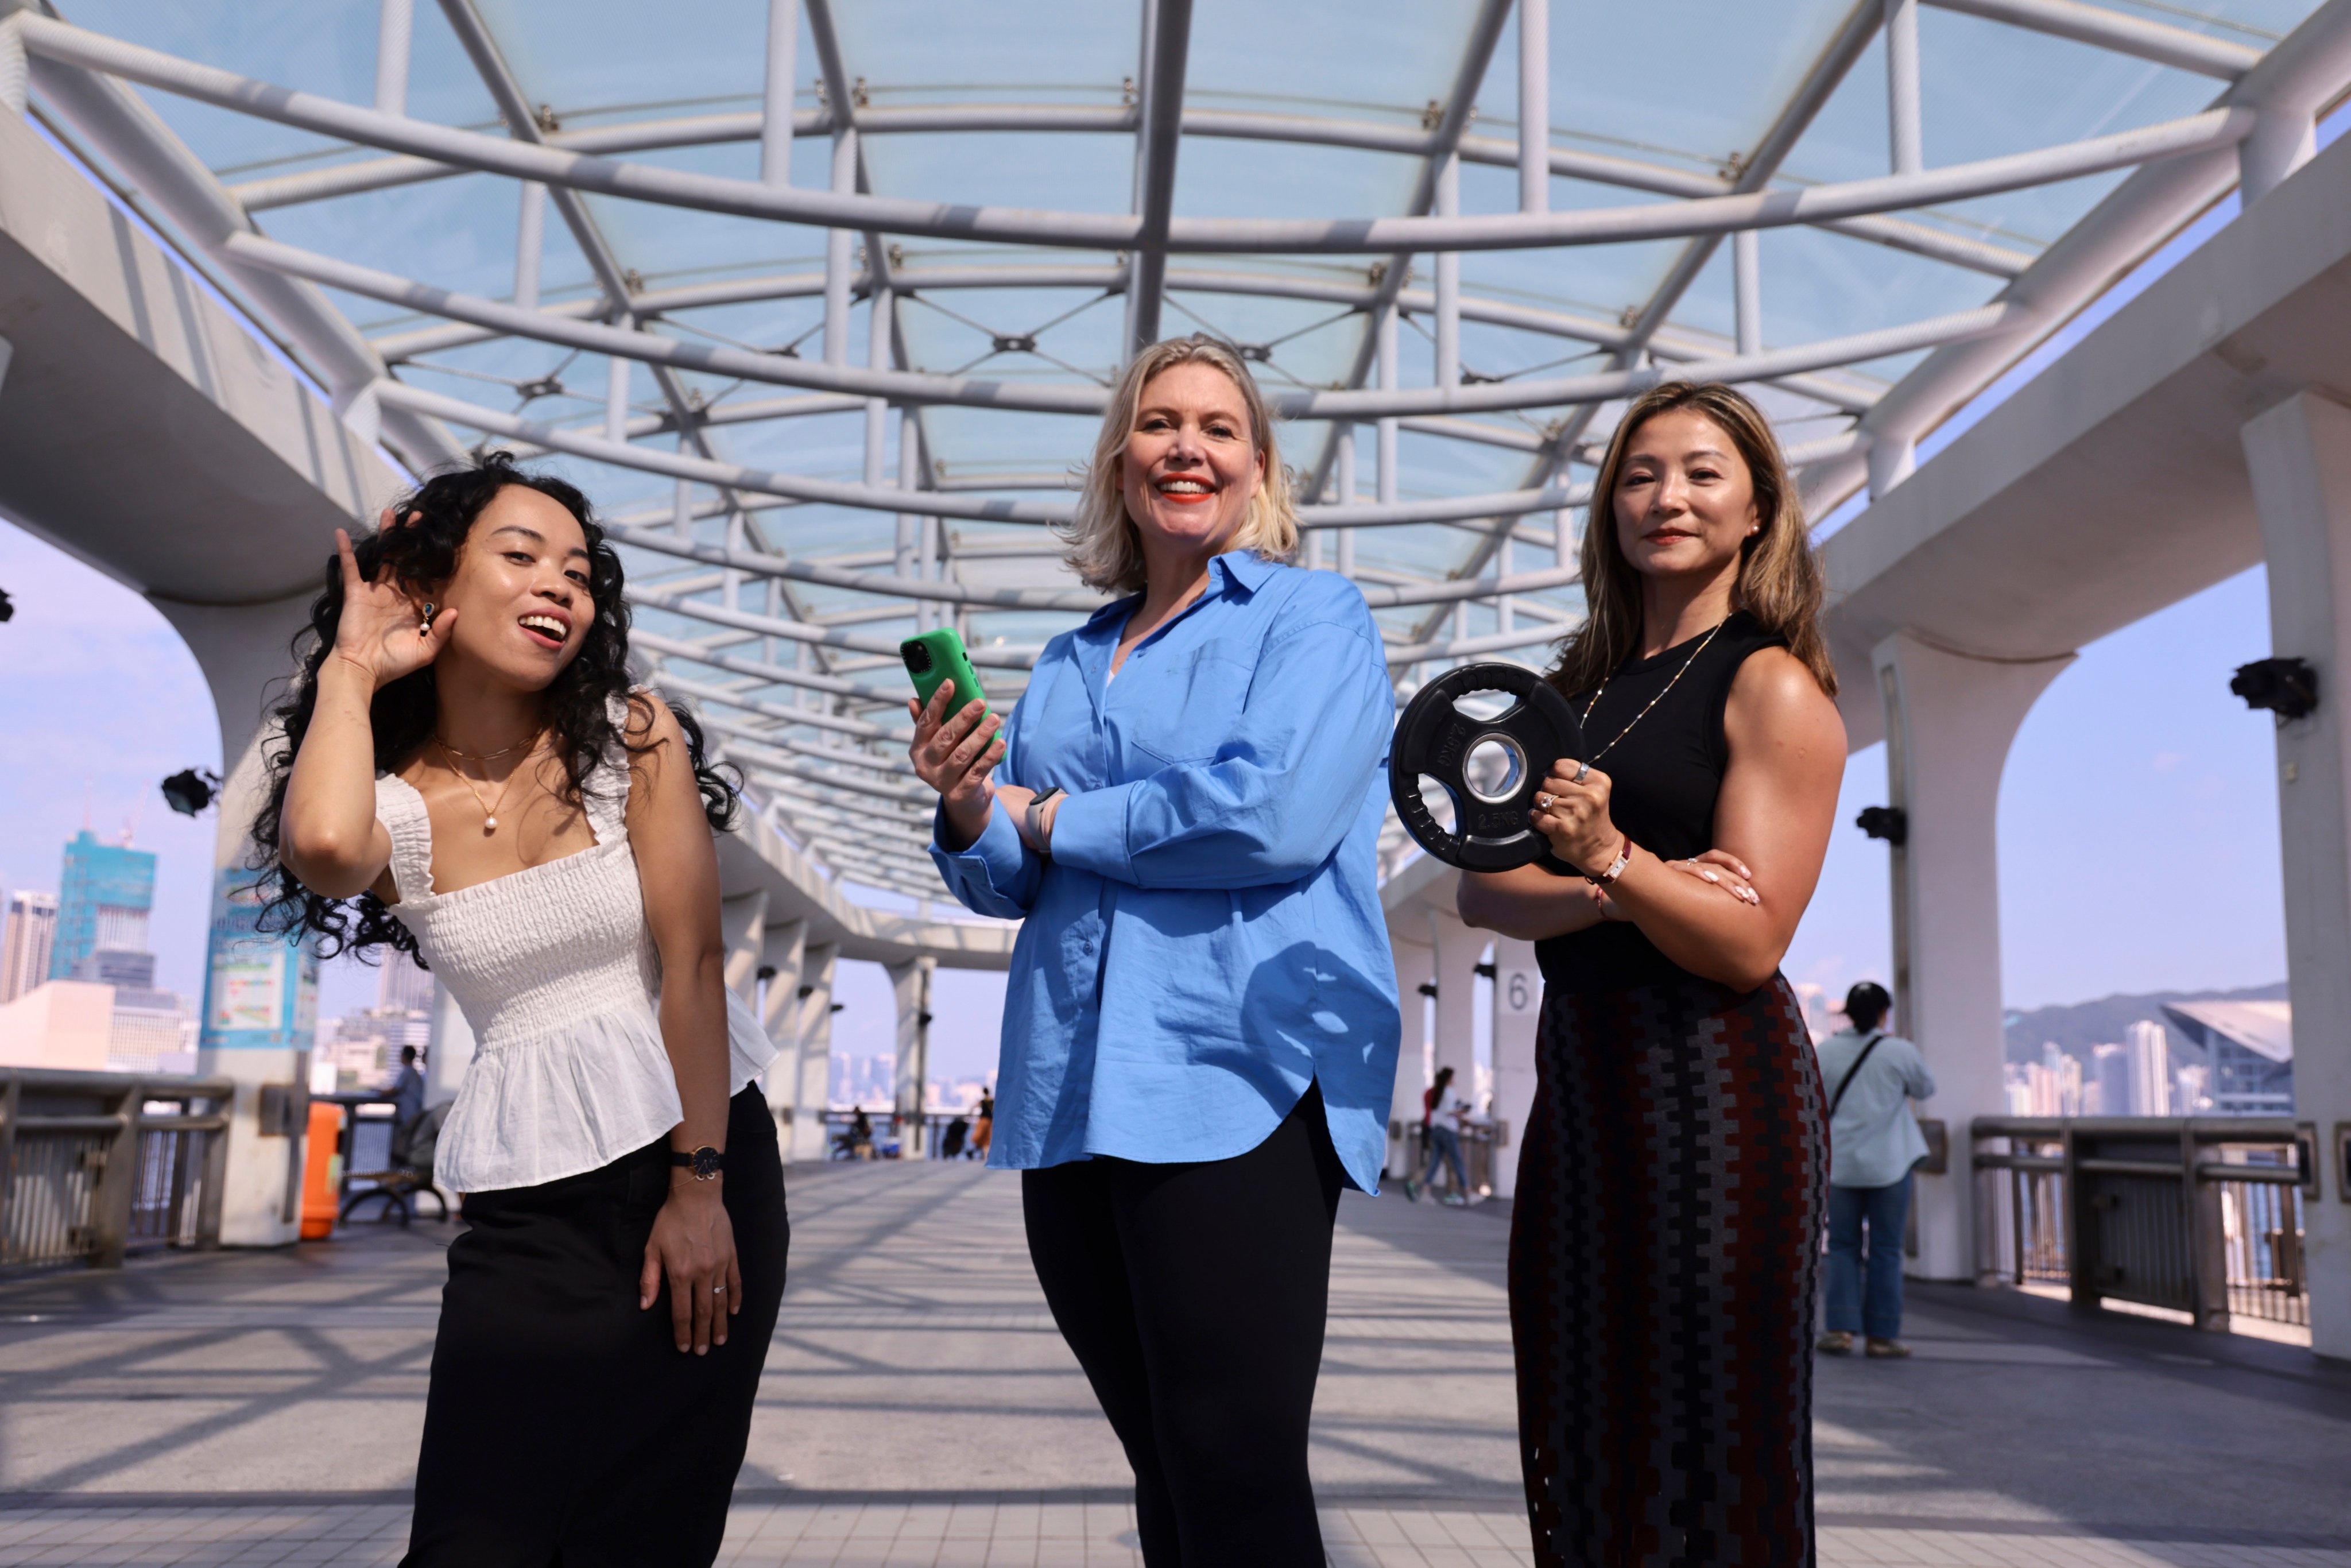 (From left) Eny Bawse, Maaike Steinebach and Dr Laurena Law will all speak at the upcoming TEDx talk in Hong Kong, TEDxTinHauWomen. Photo: May Tse